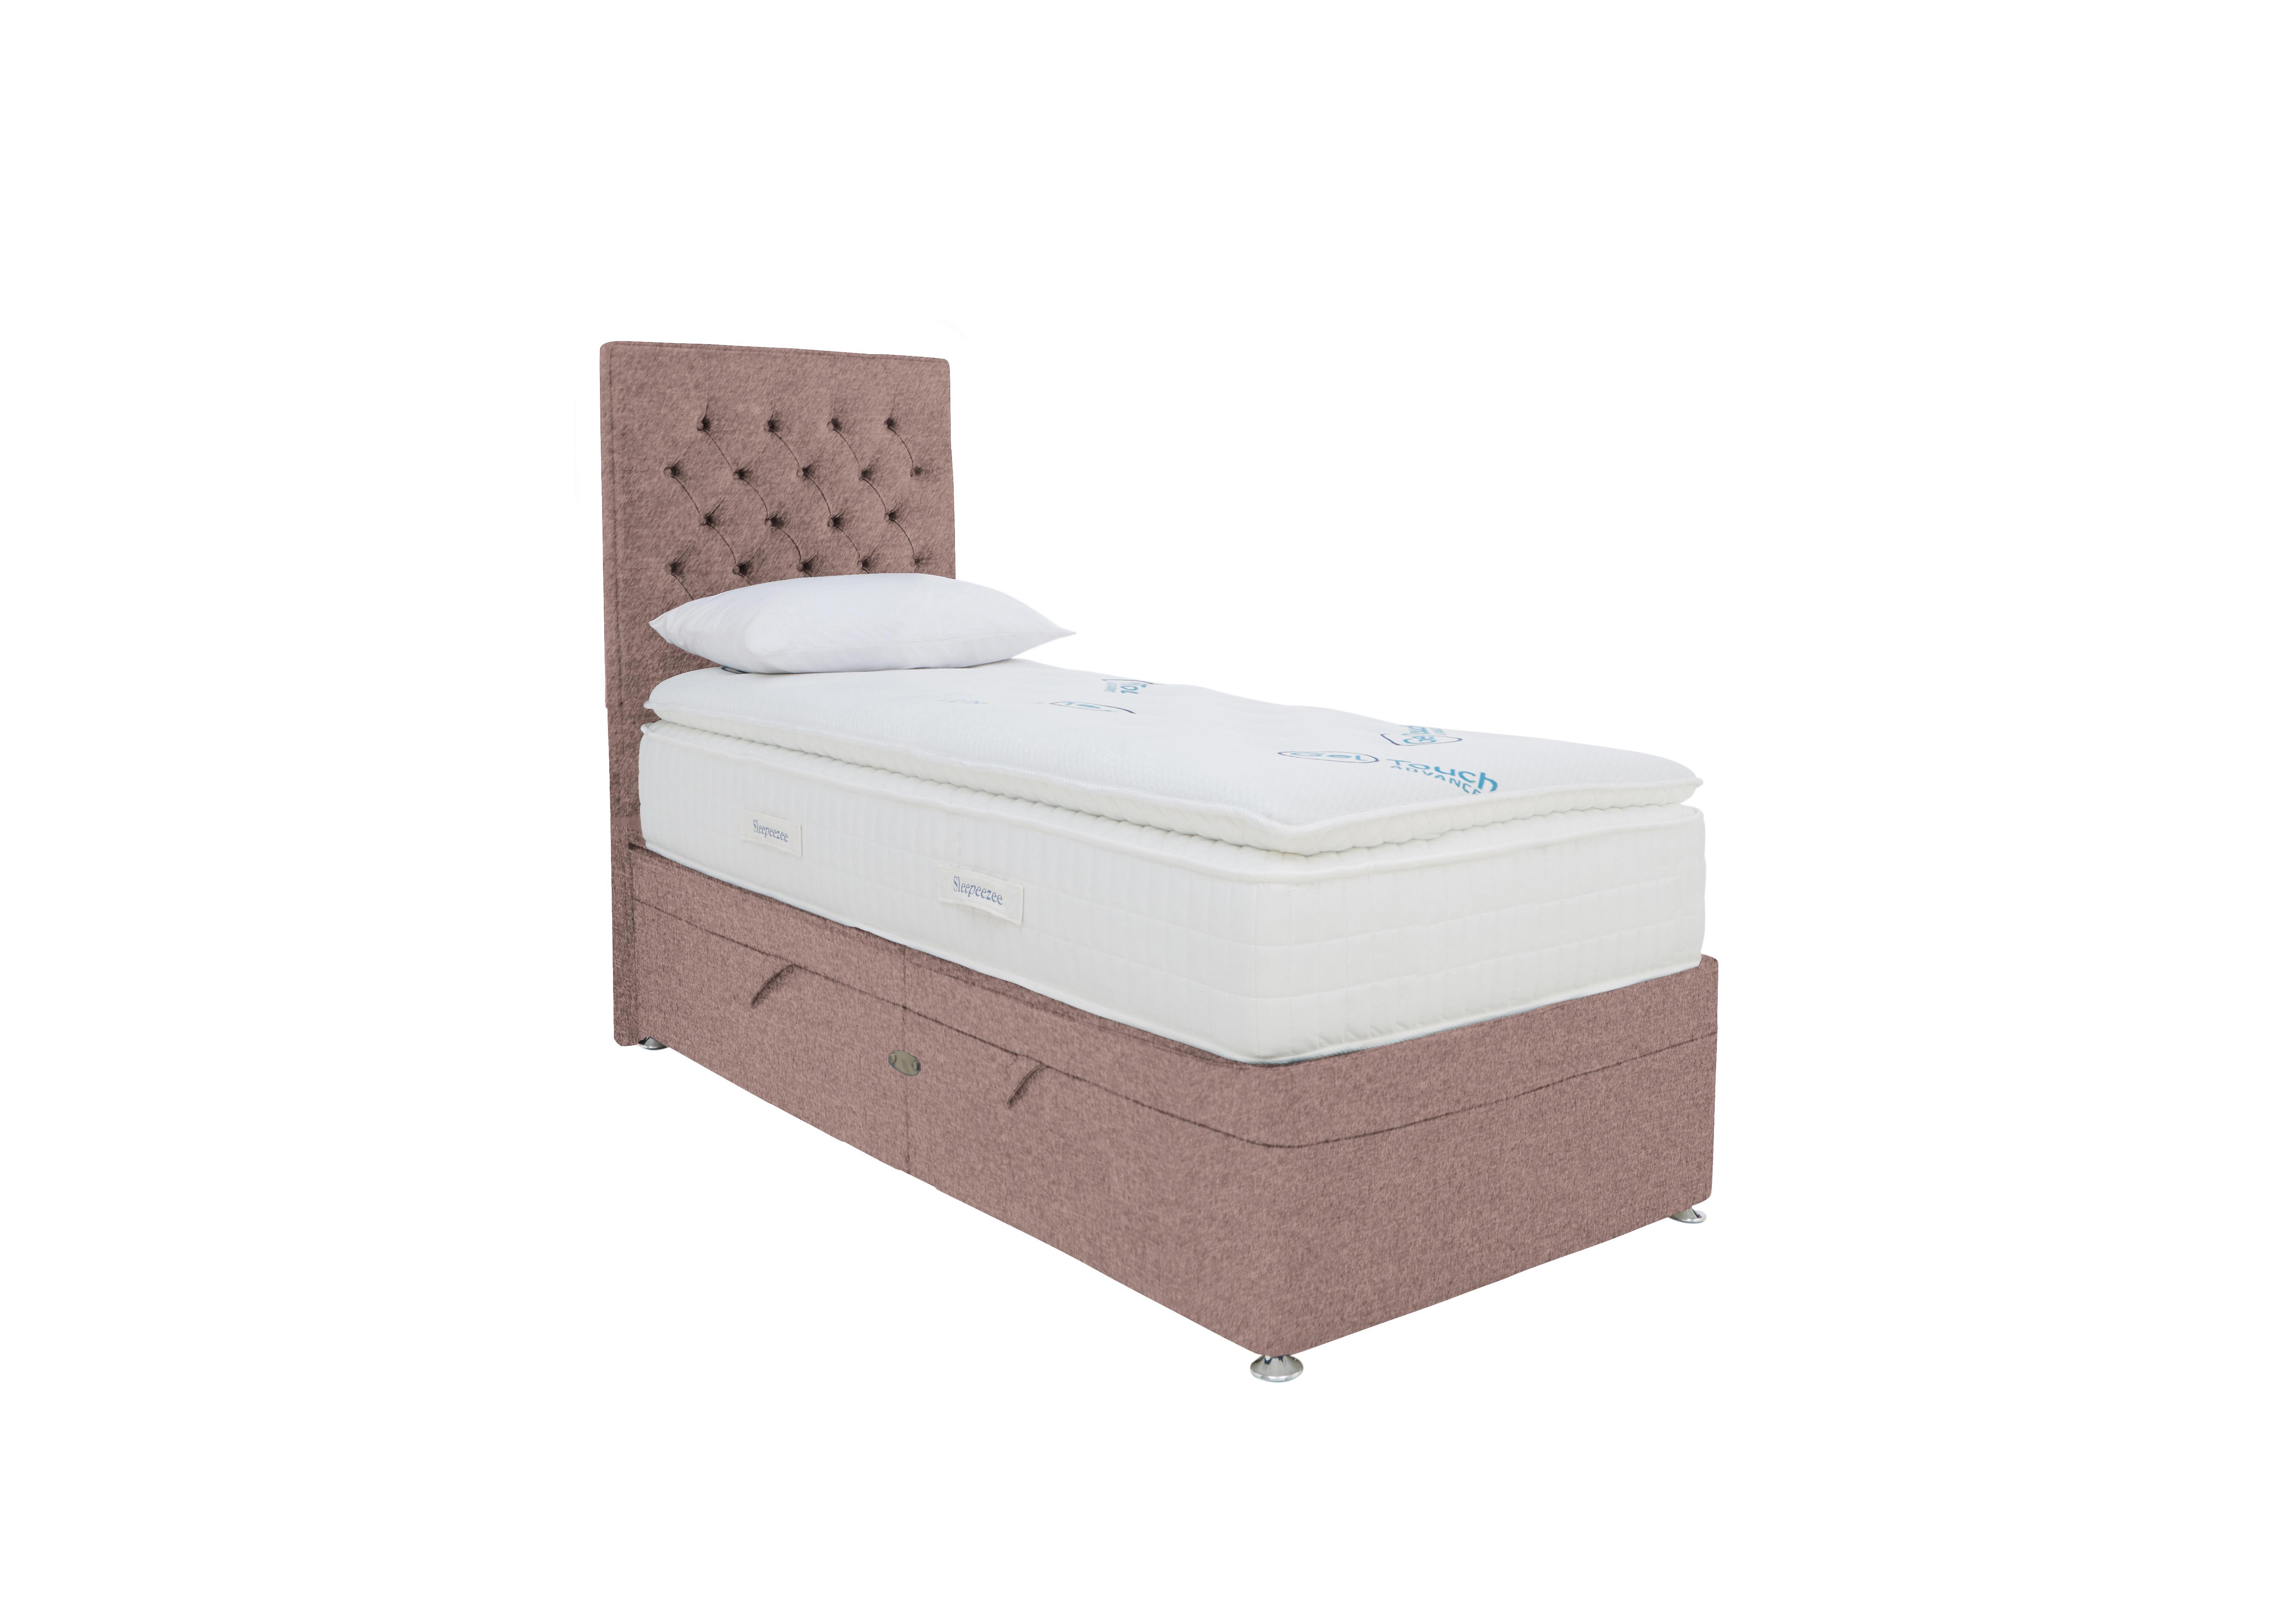 Geltouch Advanced 10000 Side-Lift Ottoman Divan Set in Tweed 701 Lilac on Furniture Village